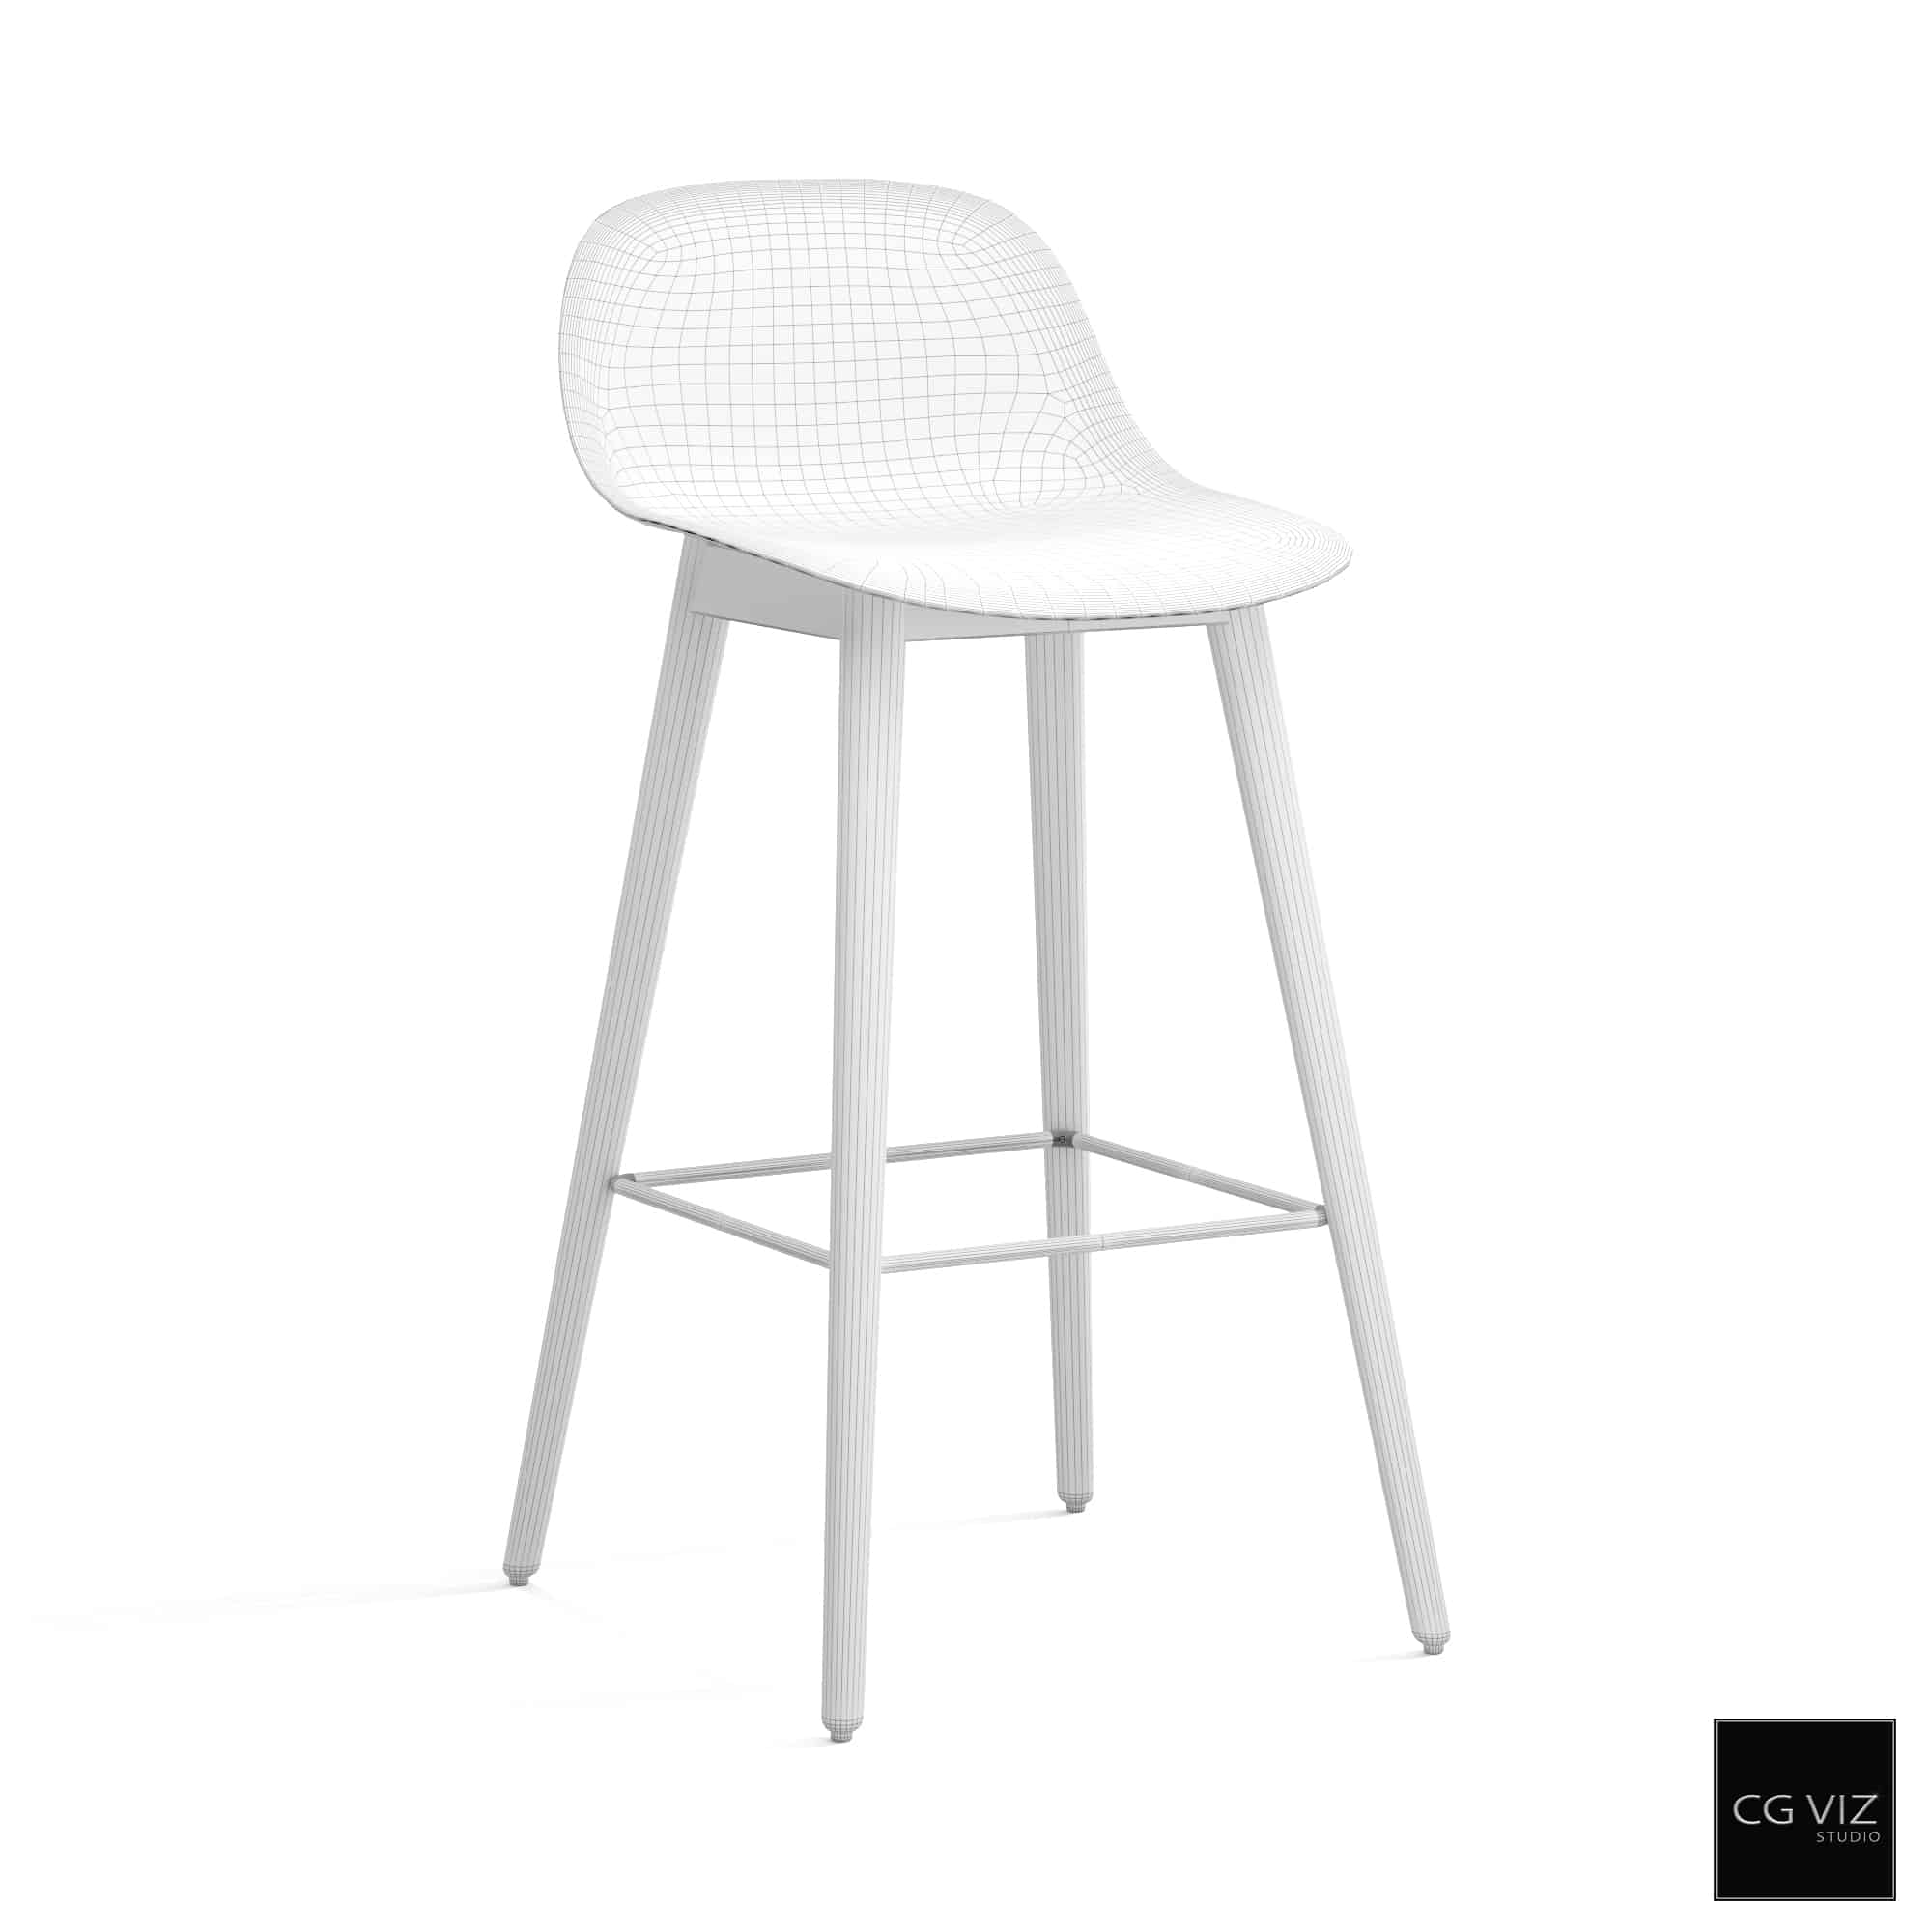 Wireframe View of Muuto Fiber Counter Stool Wood Base 3D Model